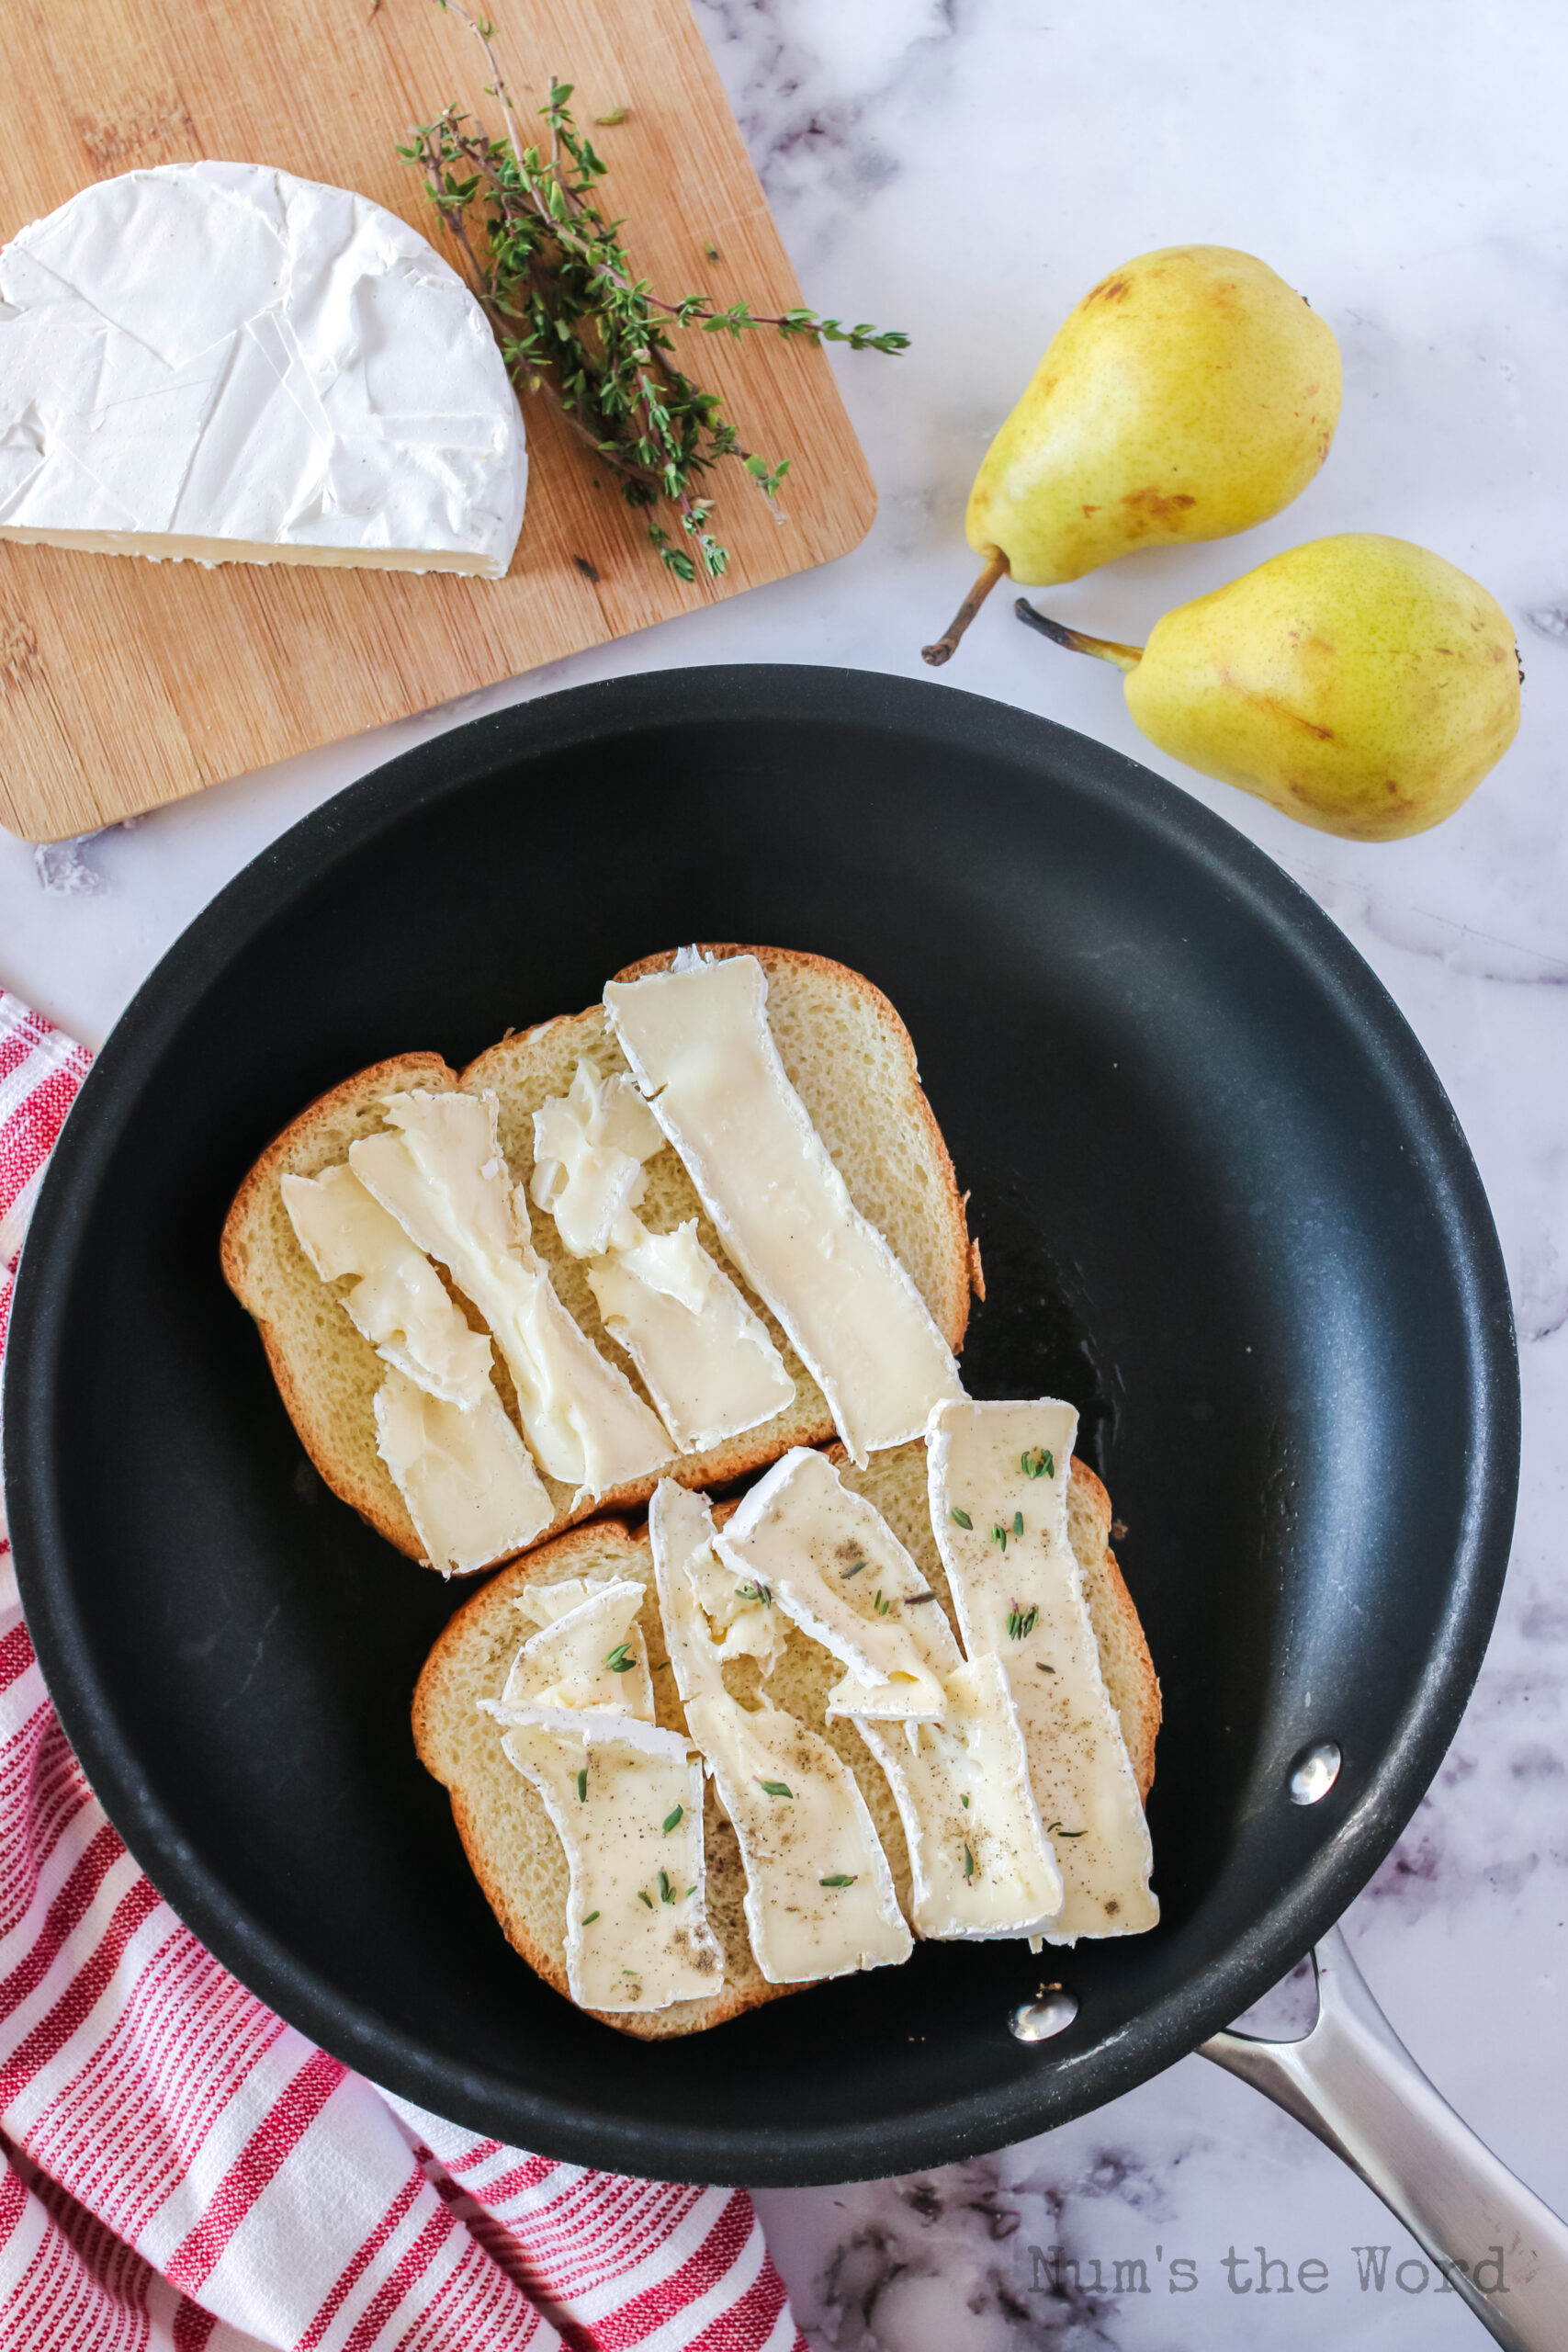 Brie on two slices of bread with thyme and brie on top of each slice.